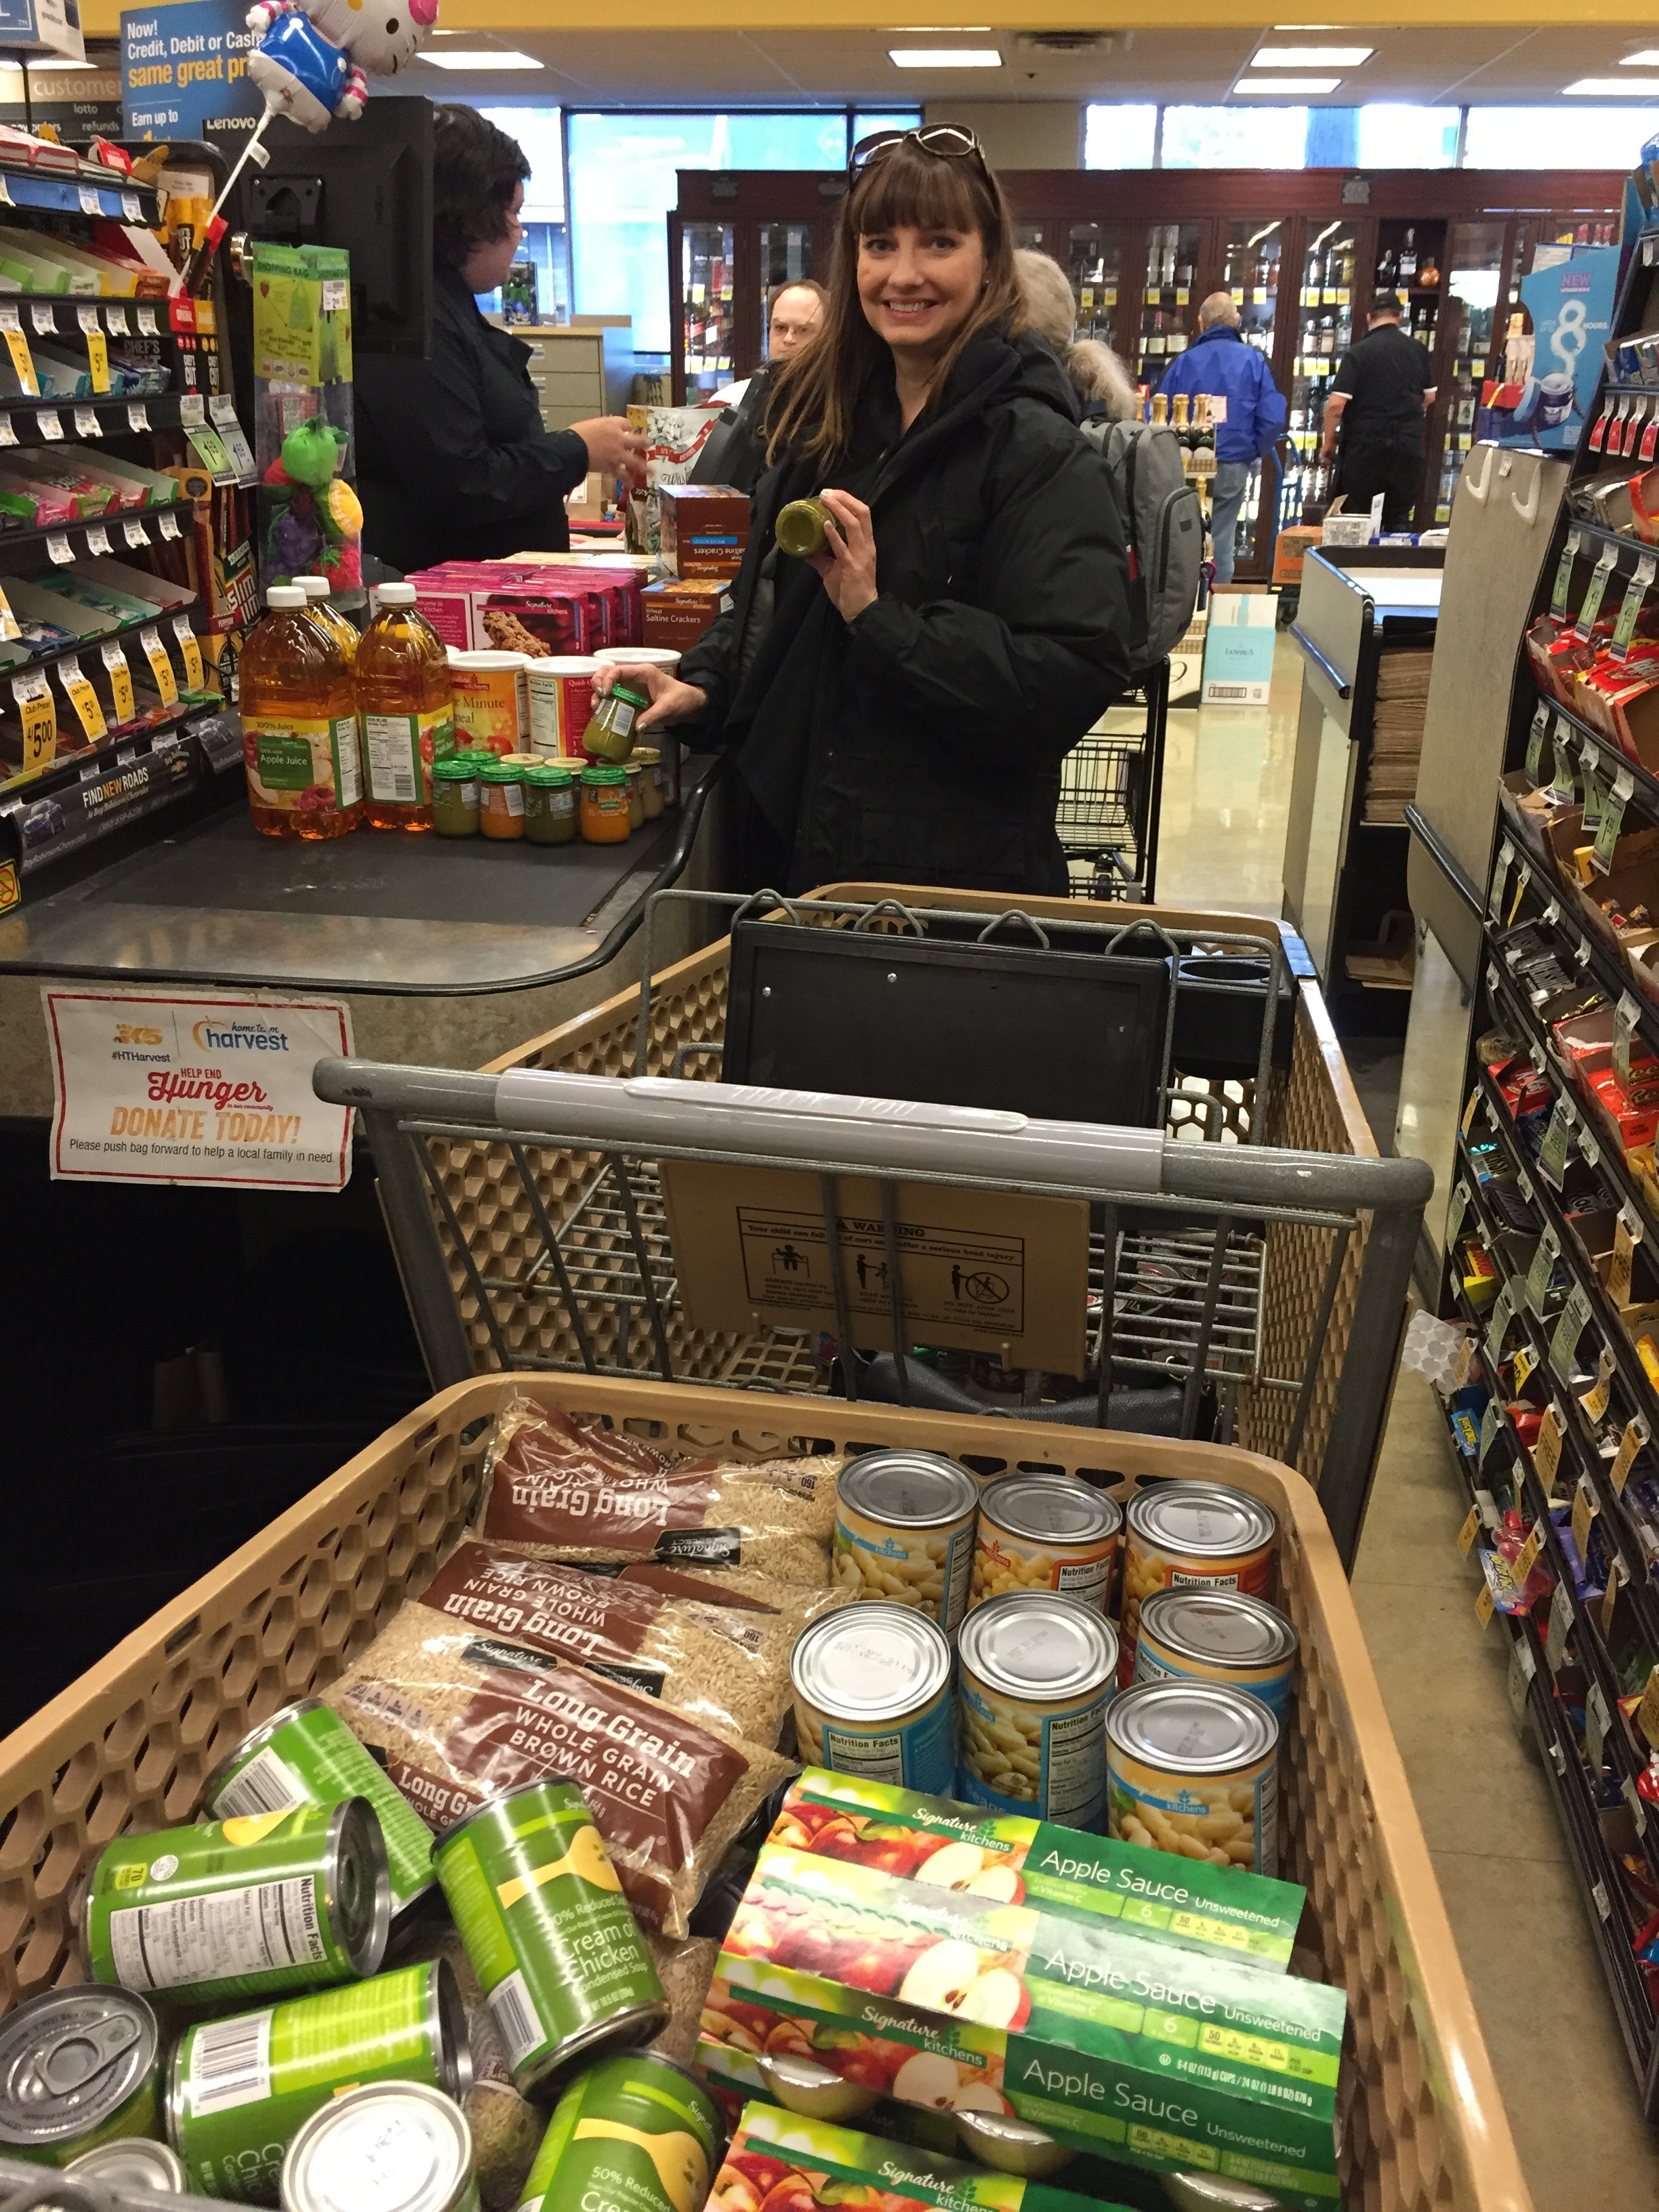 Holiday Sharing Campaign: 300 lbs of food for the Food Bank